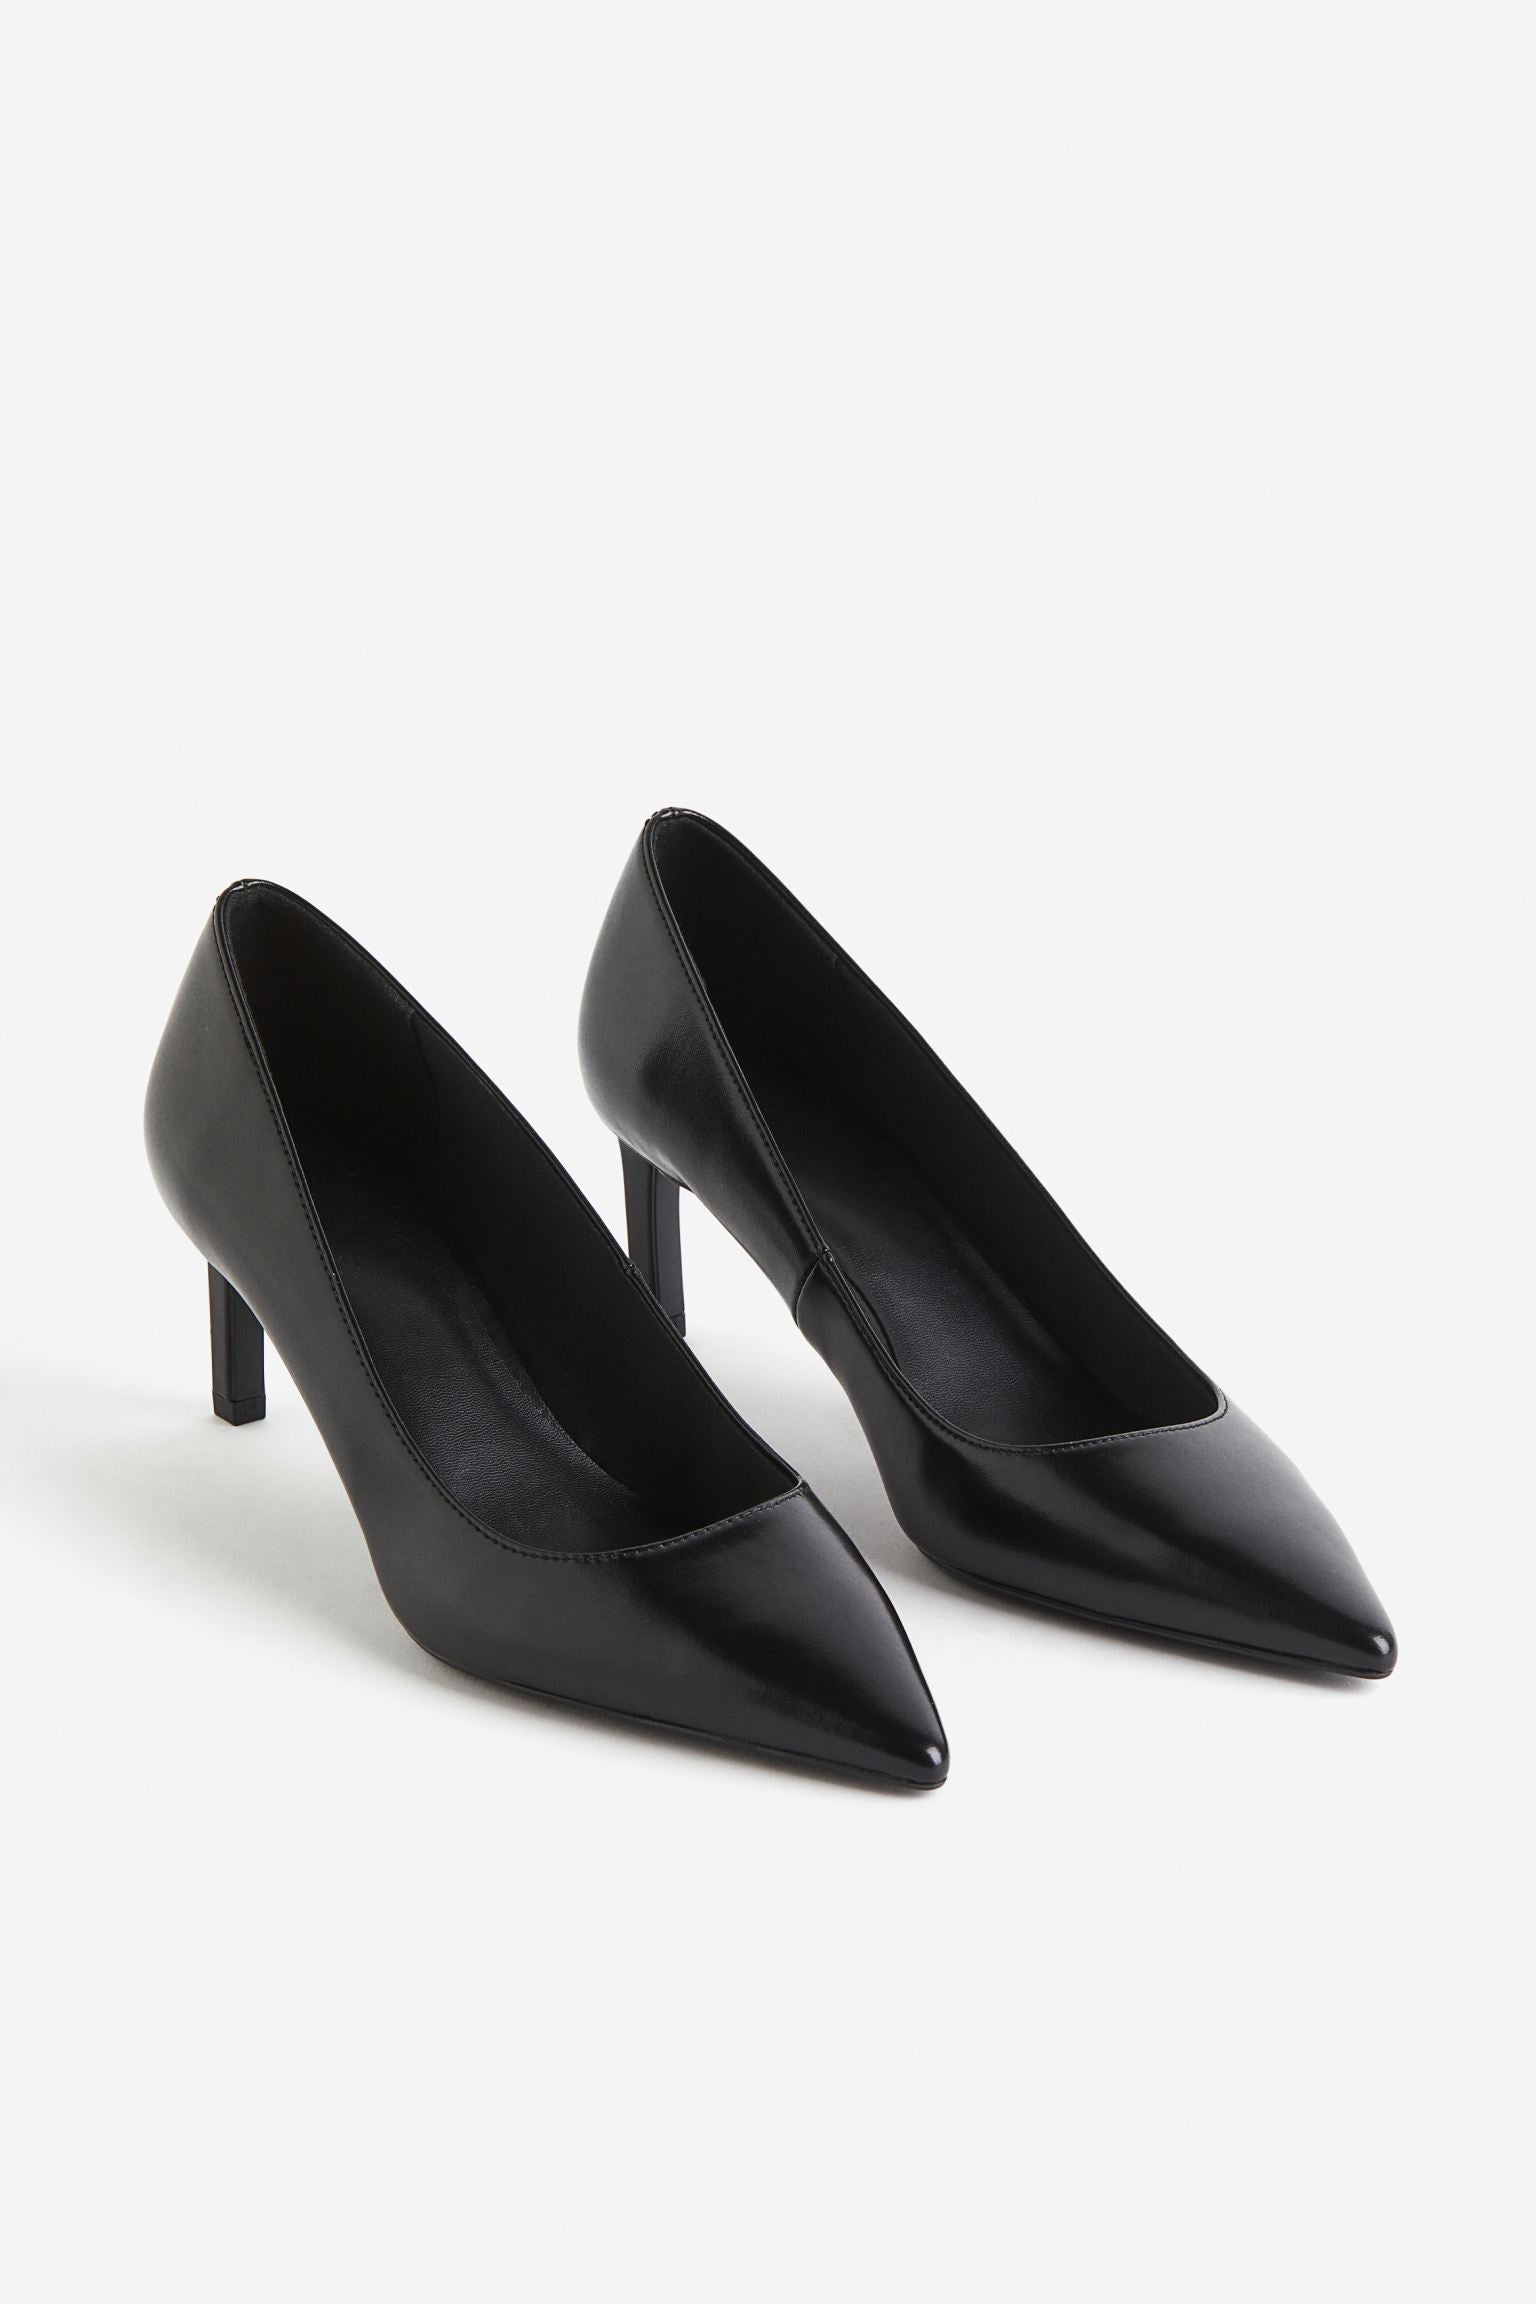 H & M LEATHER POINTED TOE PUMP IN BLACK